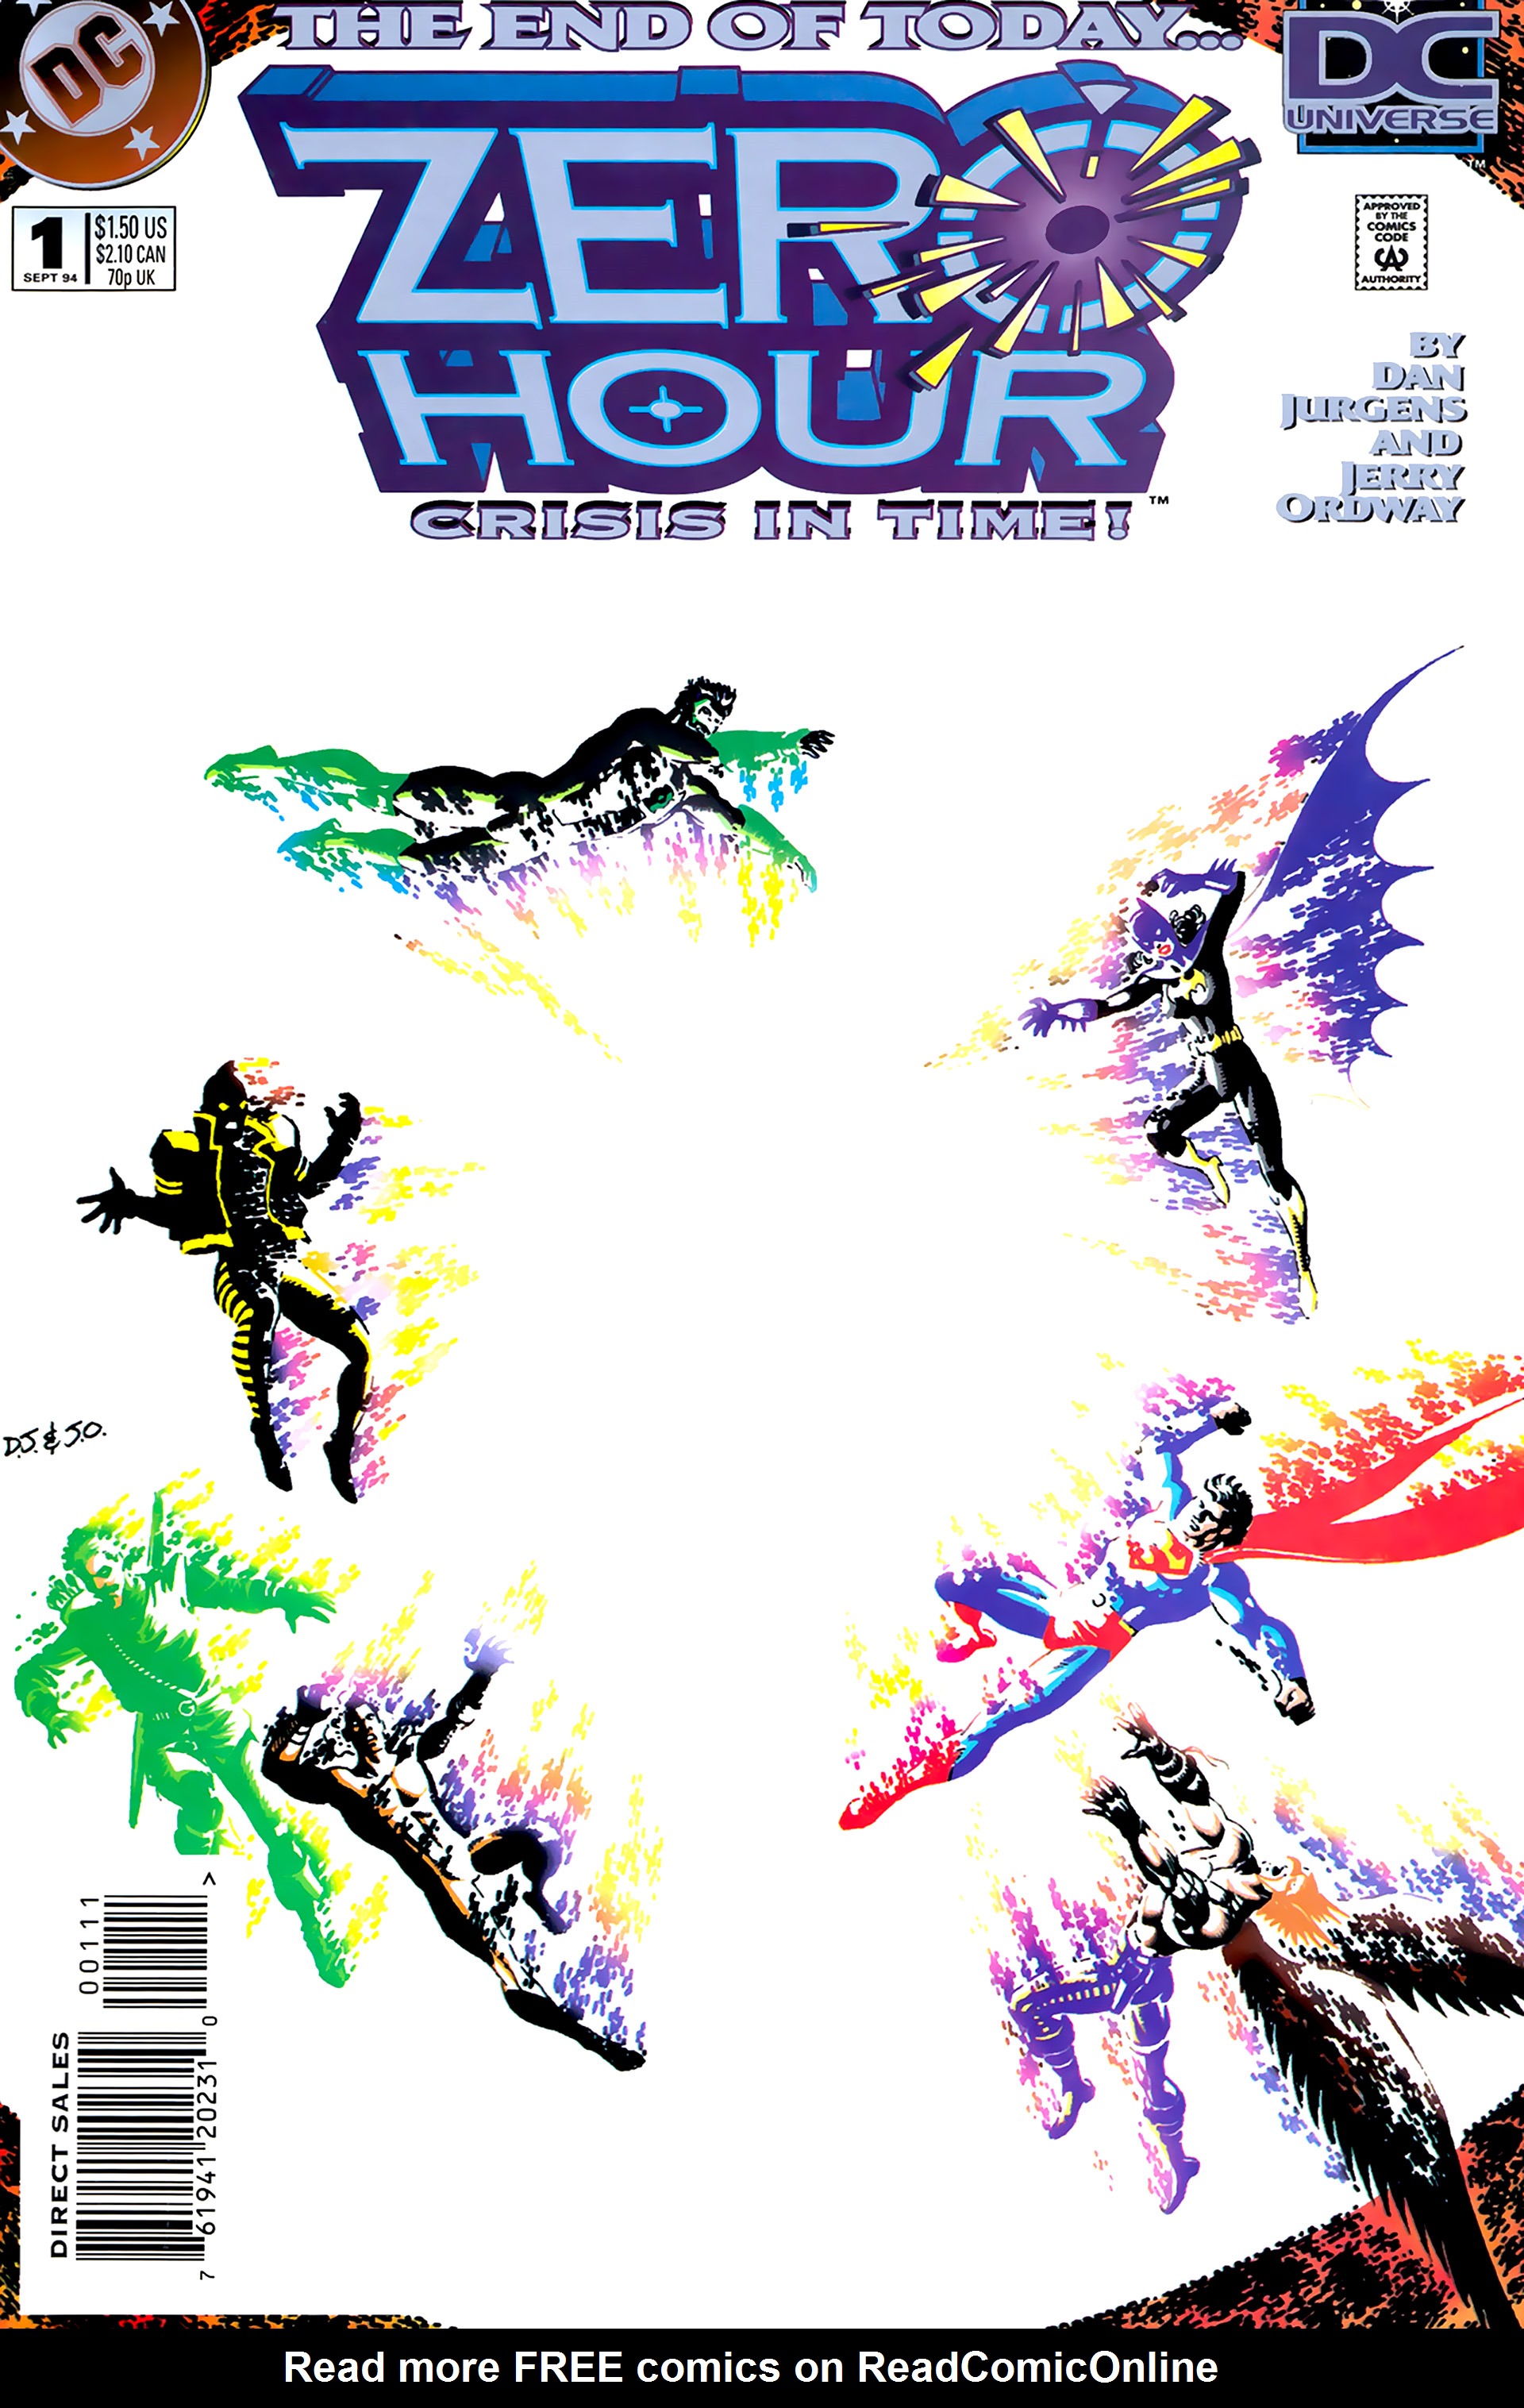 Read online Zero Hour: Crisis in Time comic -  Issue #1 - 1